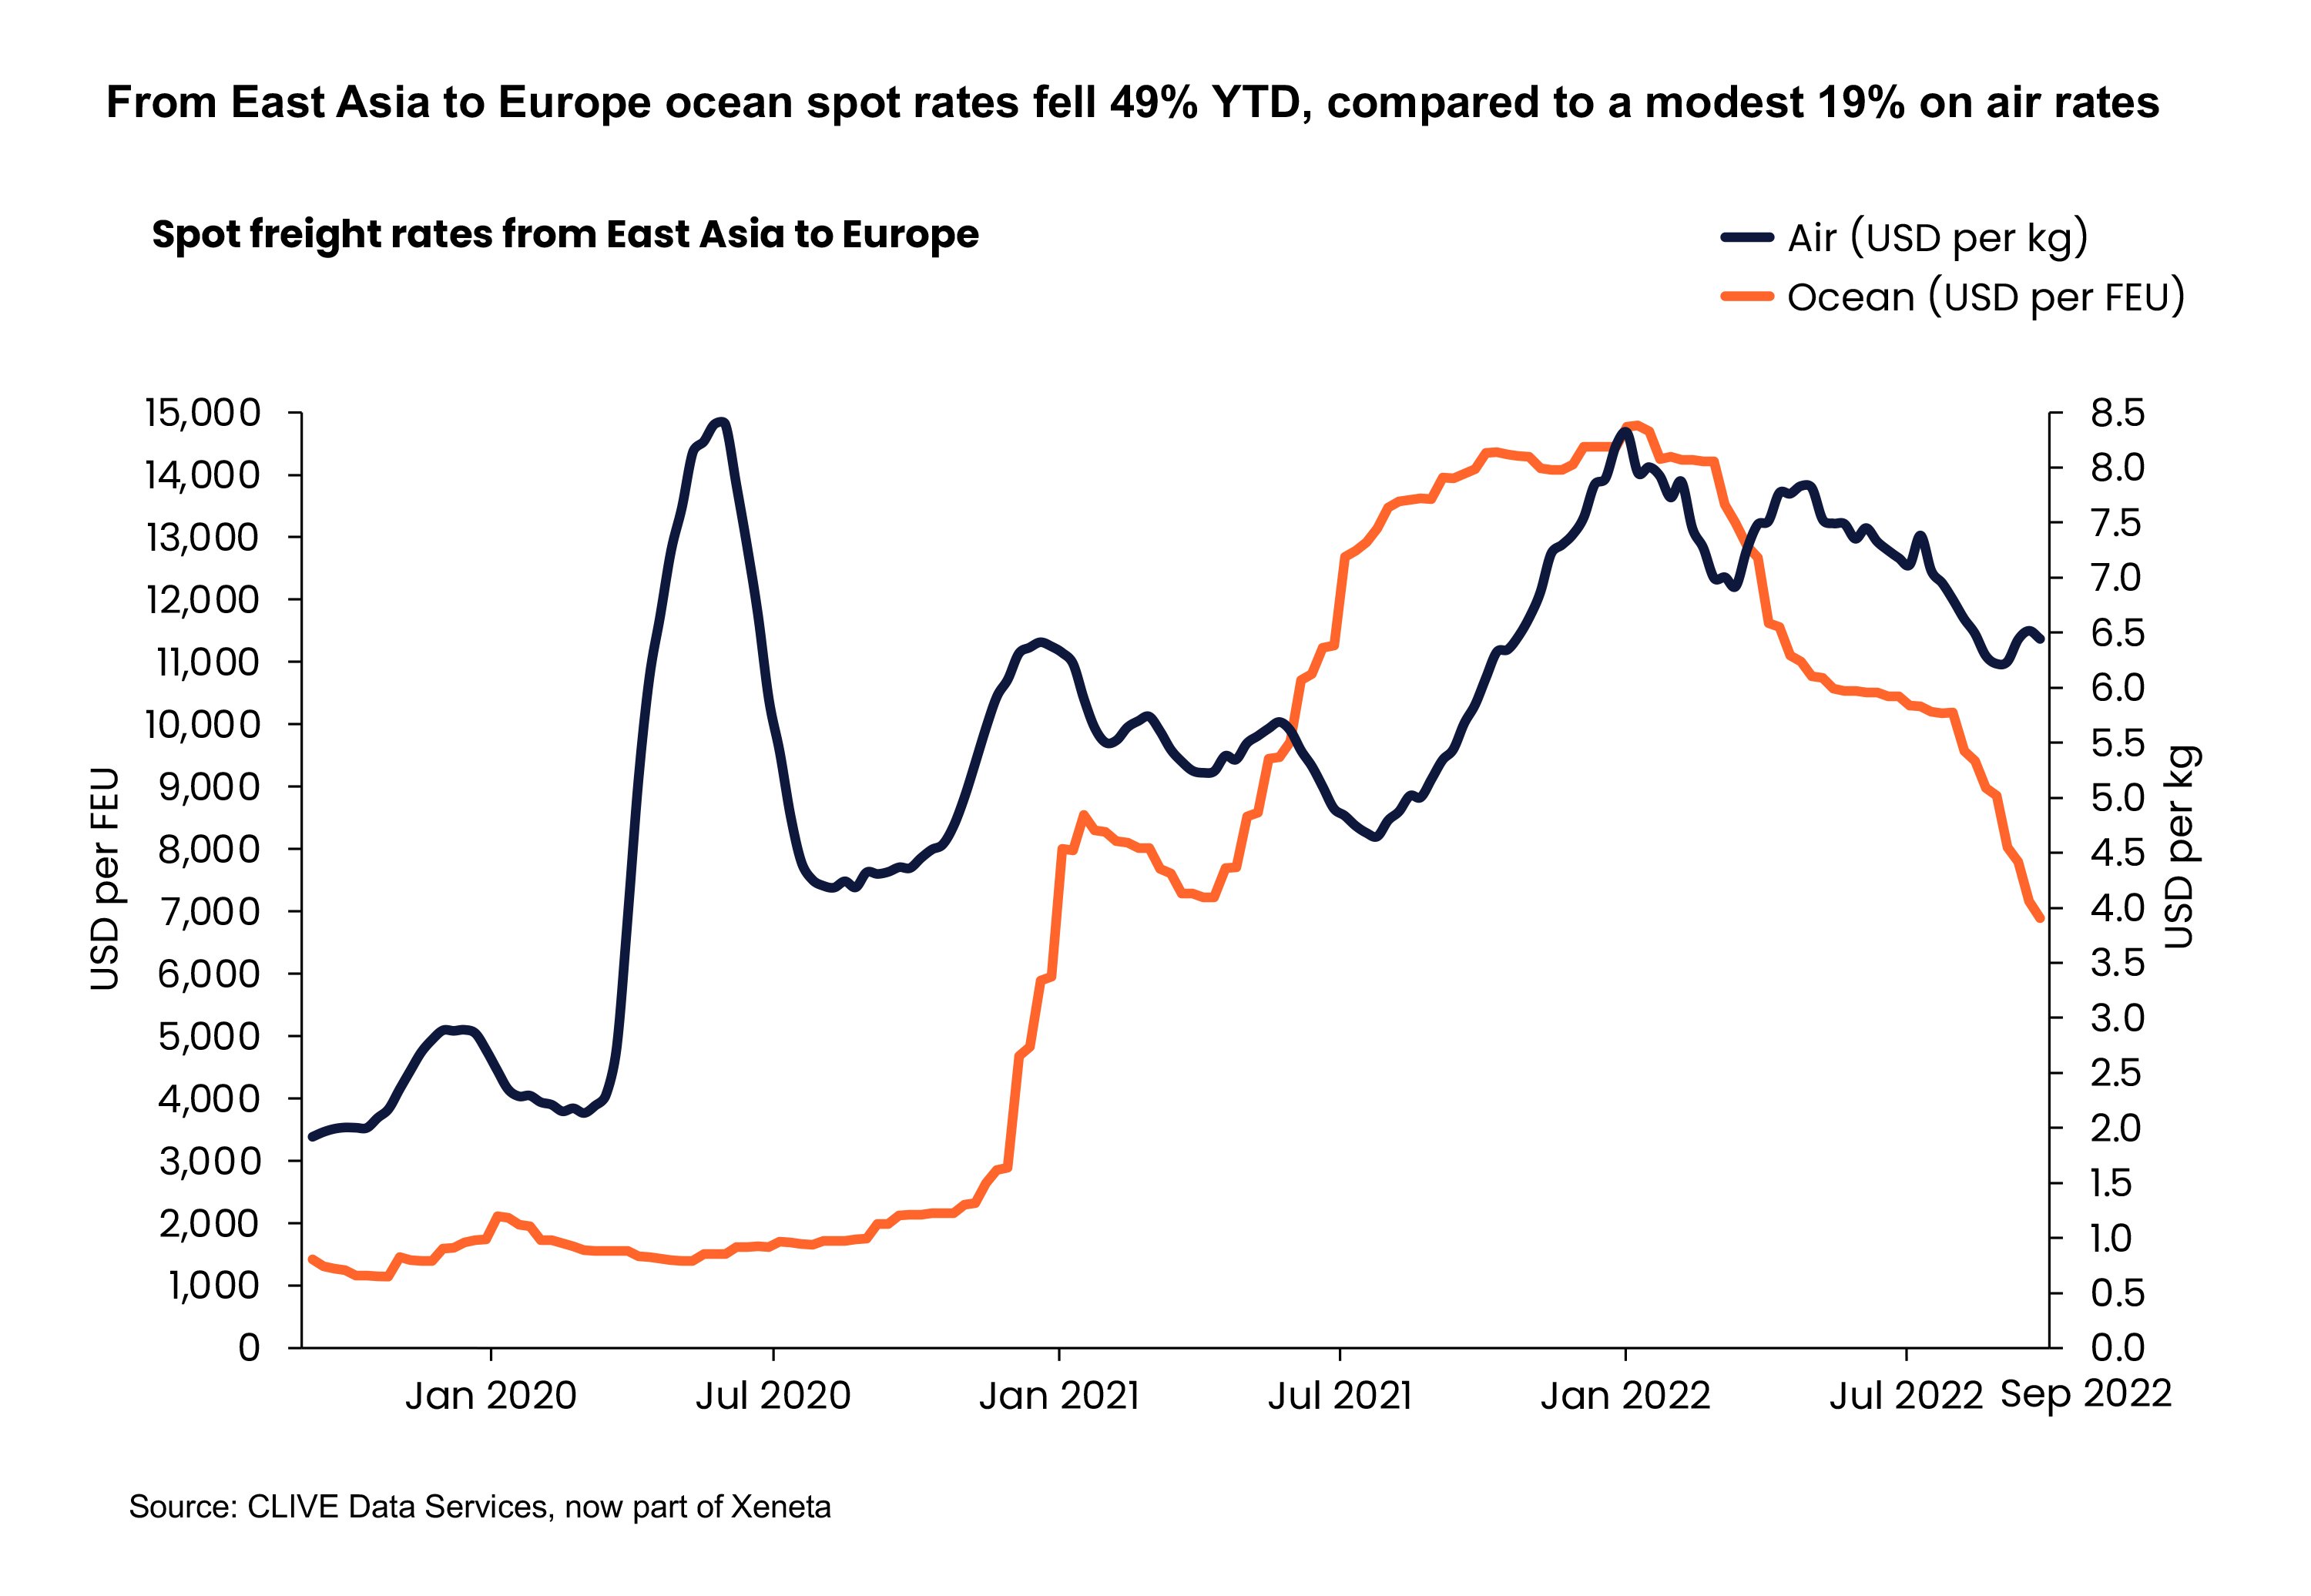 From East Asia to Europe, ocean spot rates fell 49% YTD, compared to a modest 19% on air rates